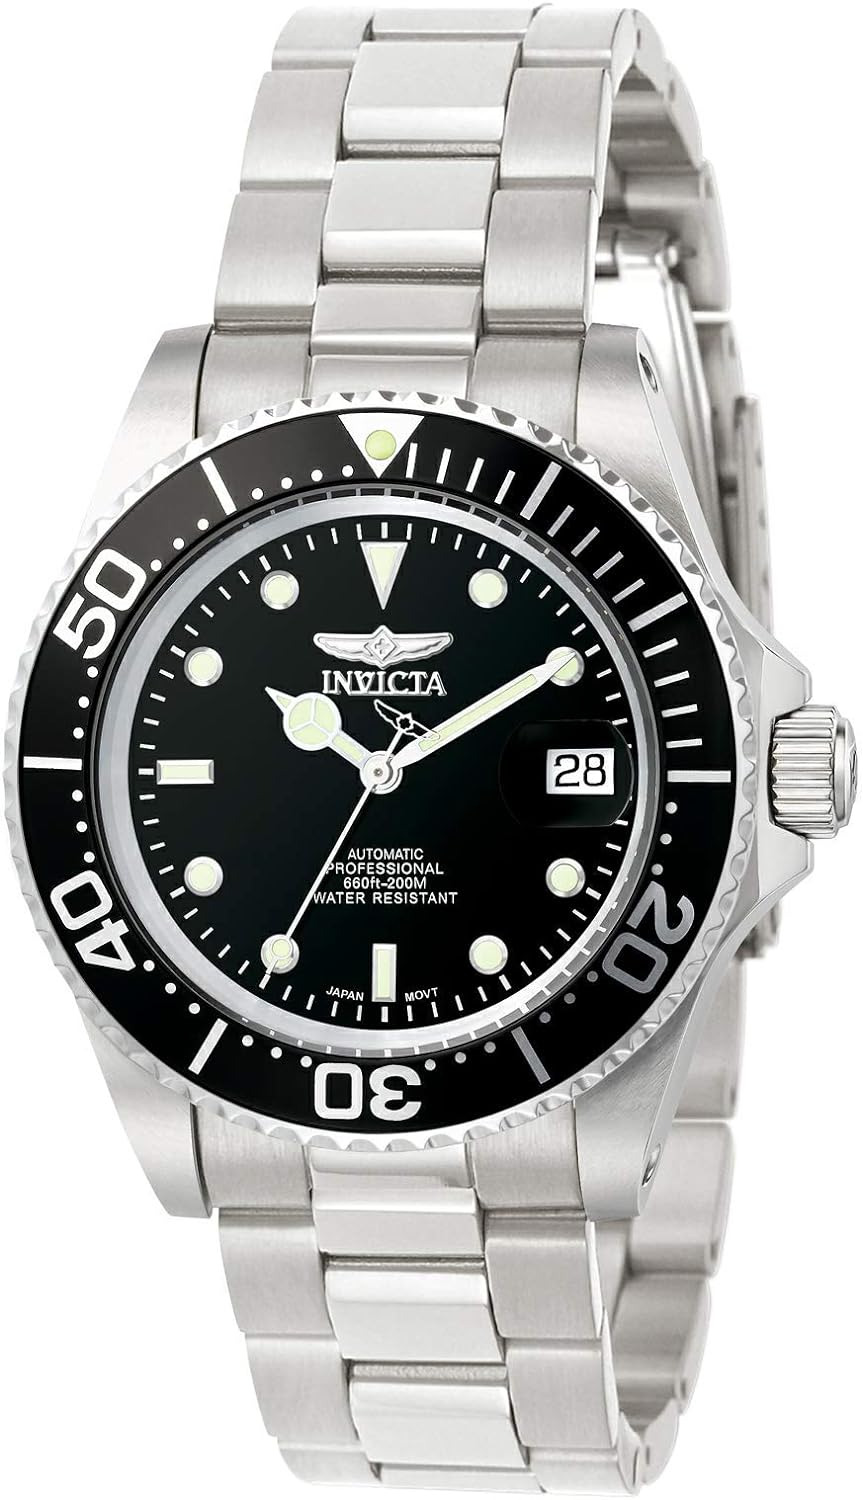 Top 8 Where To Buy Shark Watches - Home Appliances